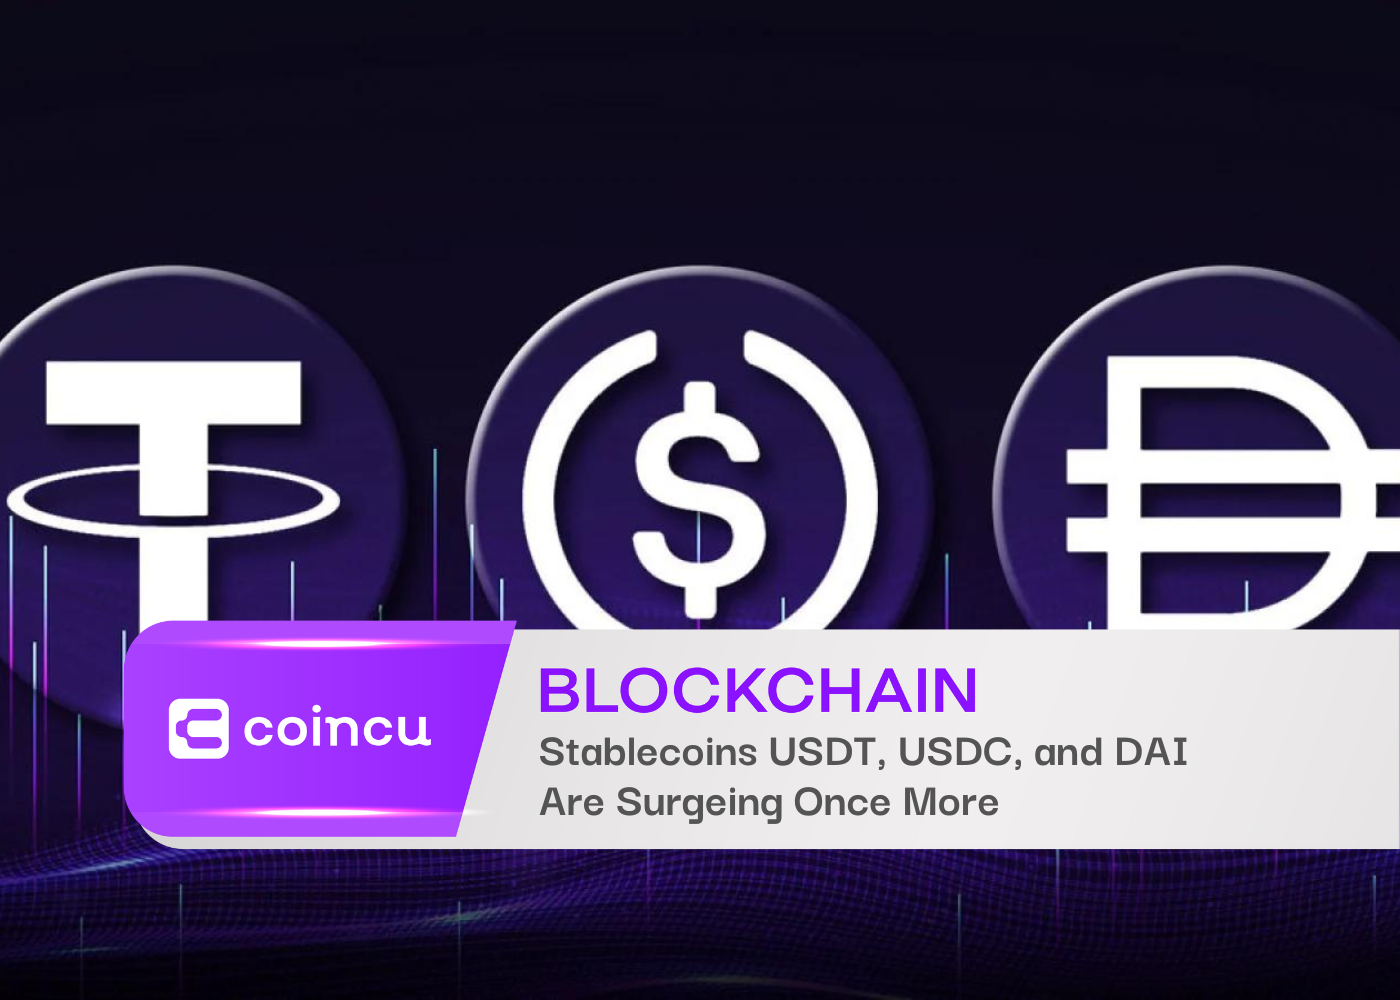 Stablecoins USDT USDC and DAI